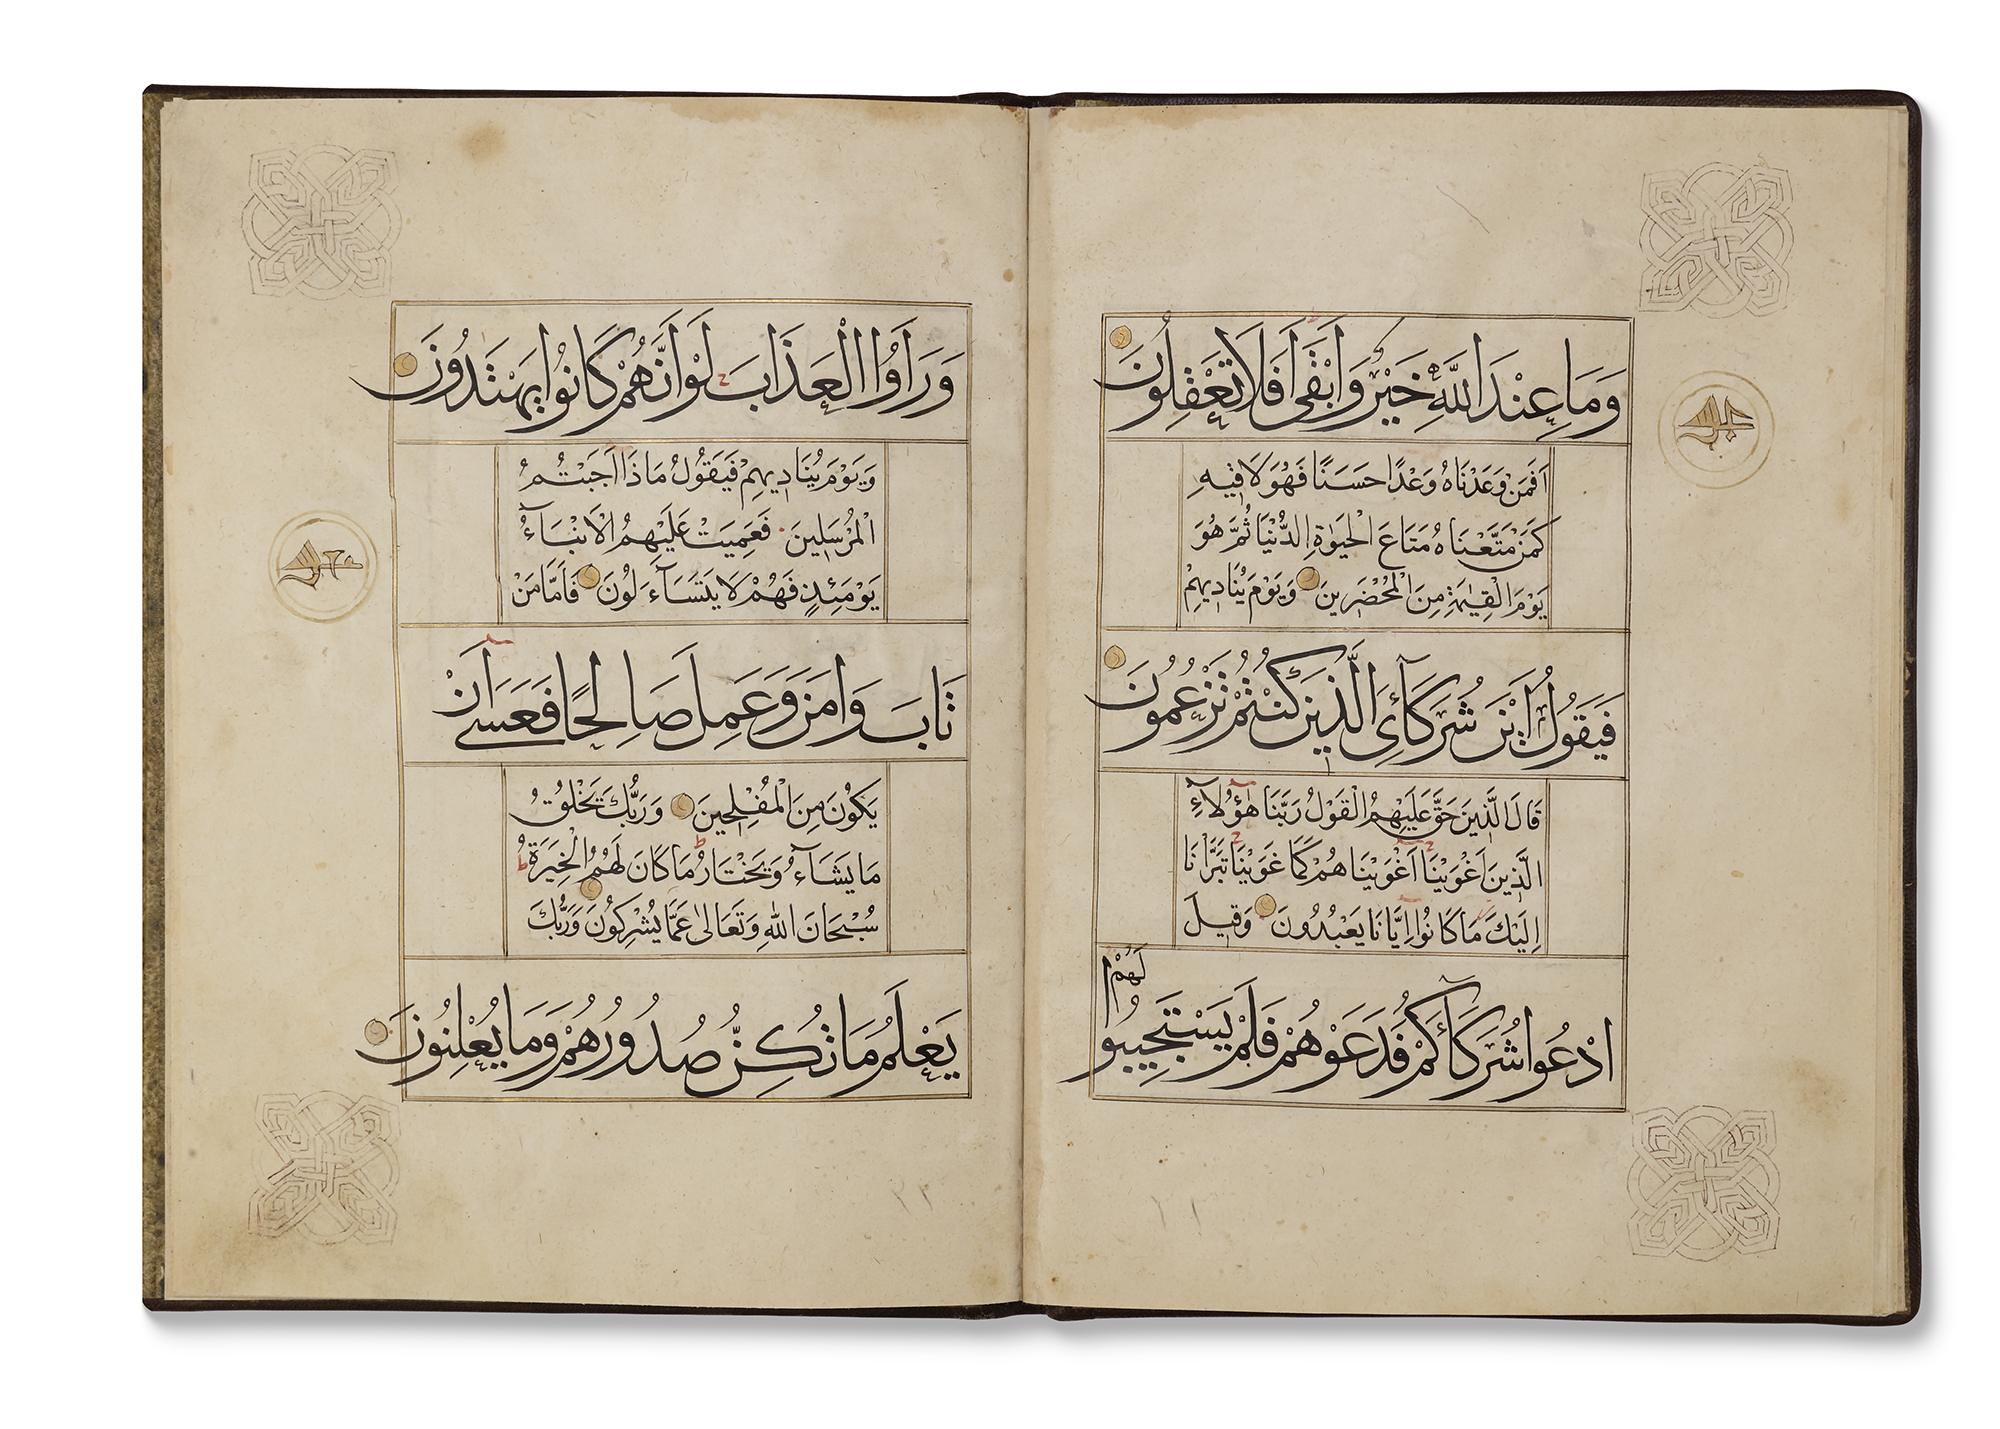 A LATE TIMURID QURAN JUZ, BY AHMED AL-RUMI IN 858 AH/1454 AD - Image 11 of 12